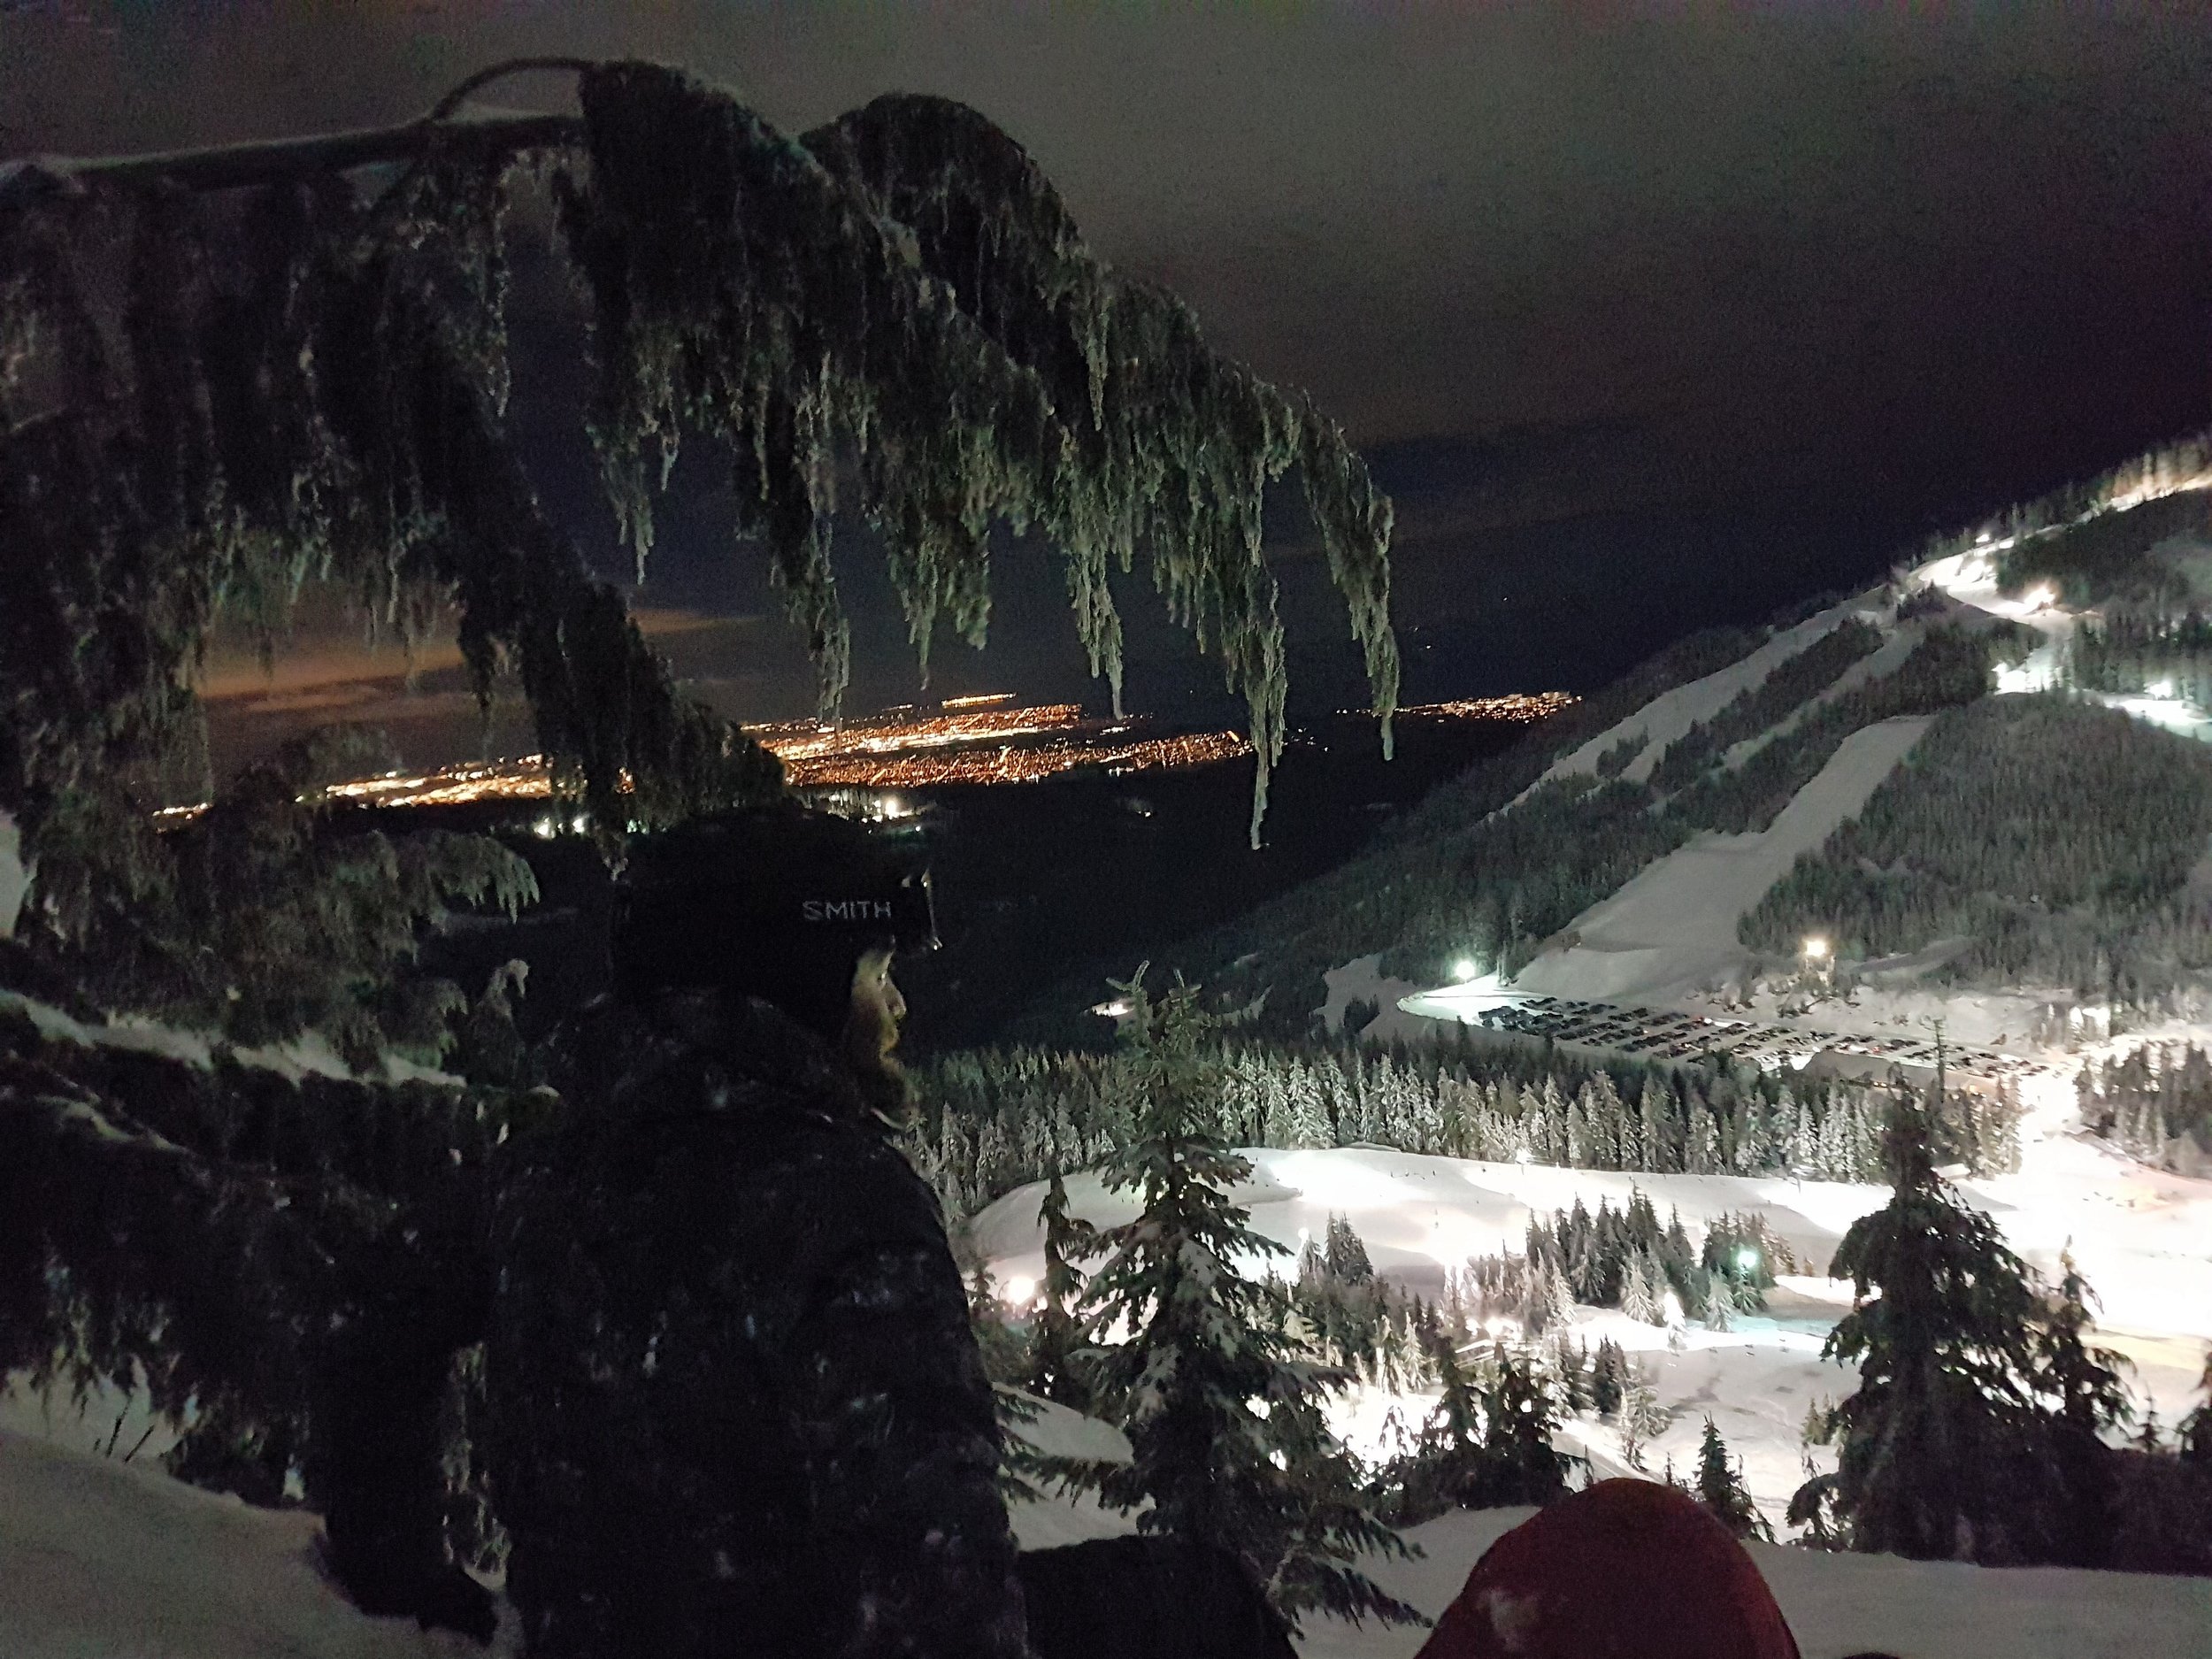 Snowboarder overlooking the local slopes in Vancouver during night time